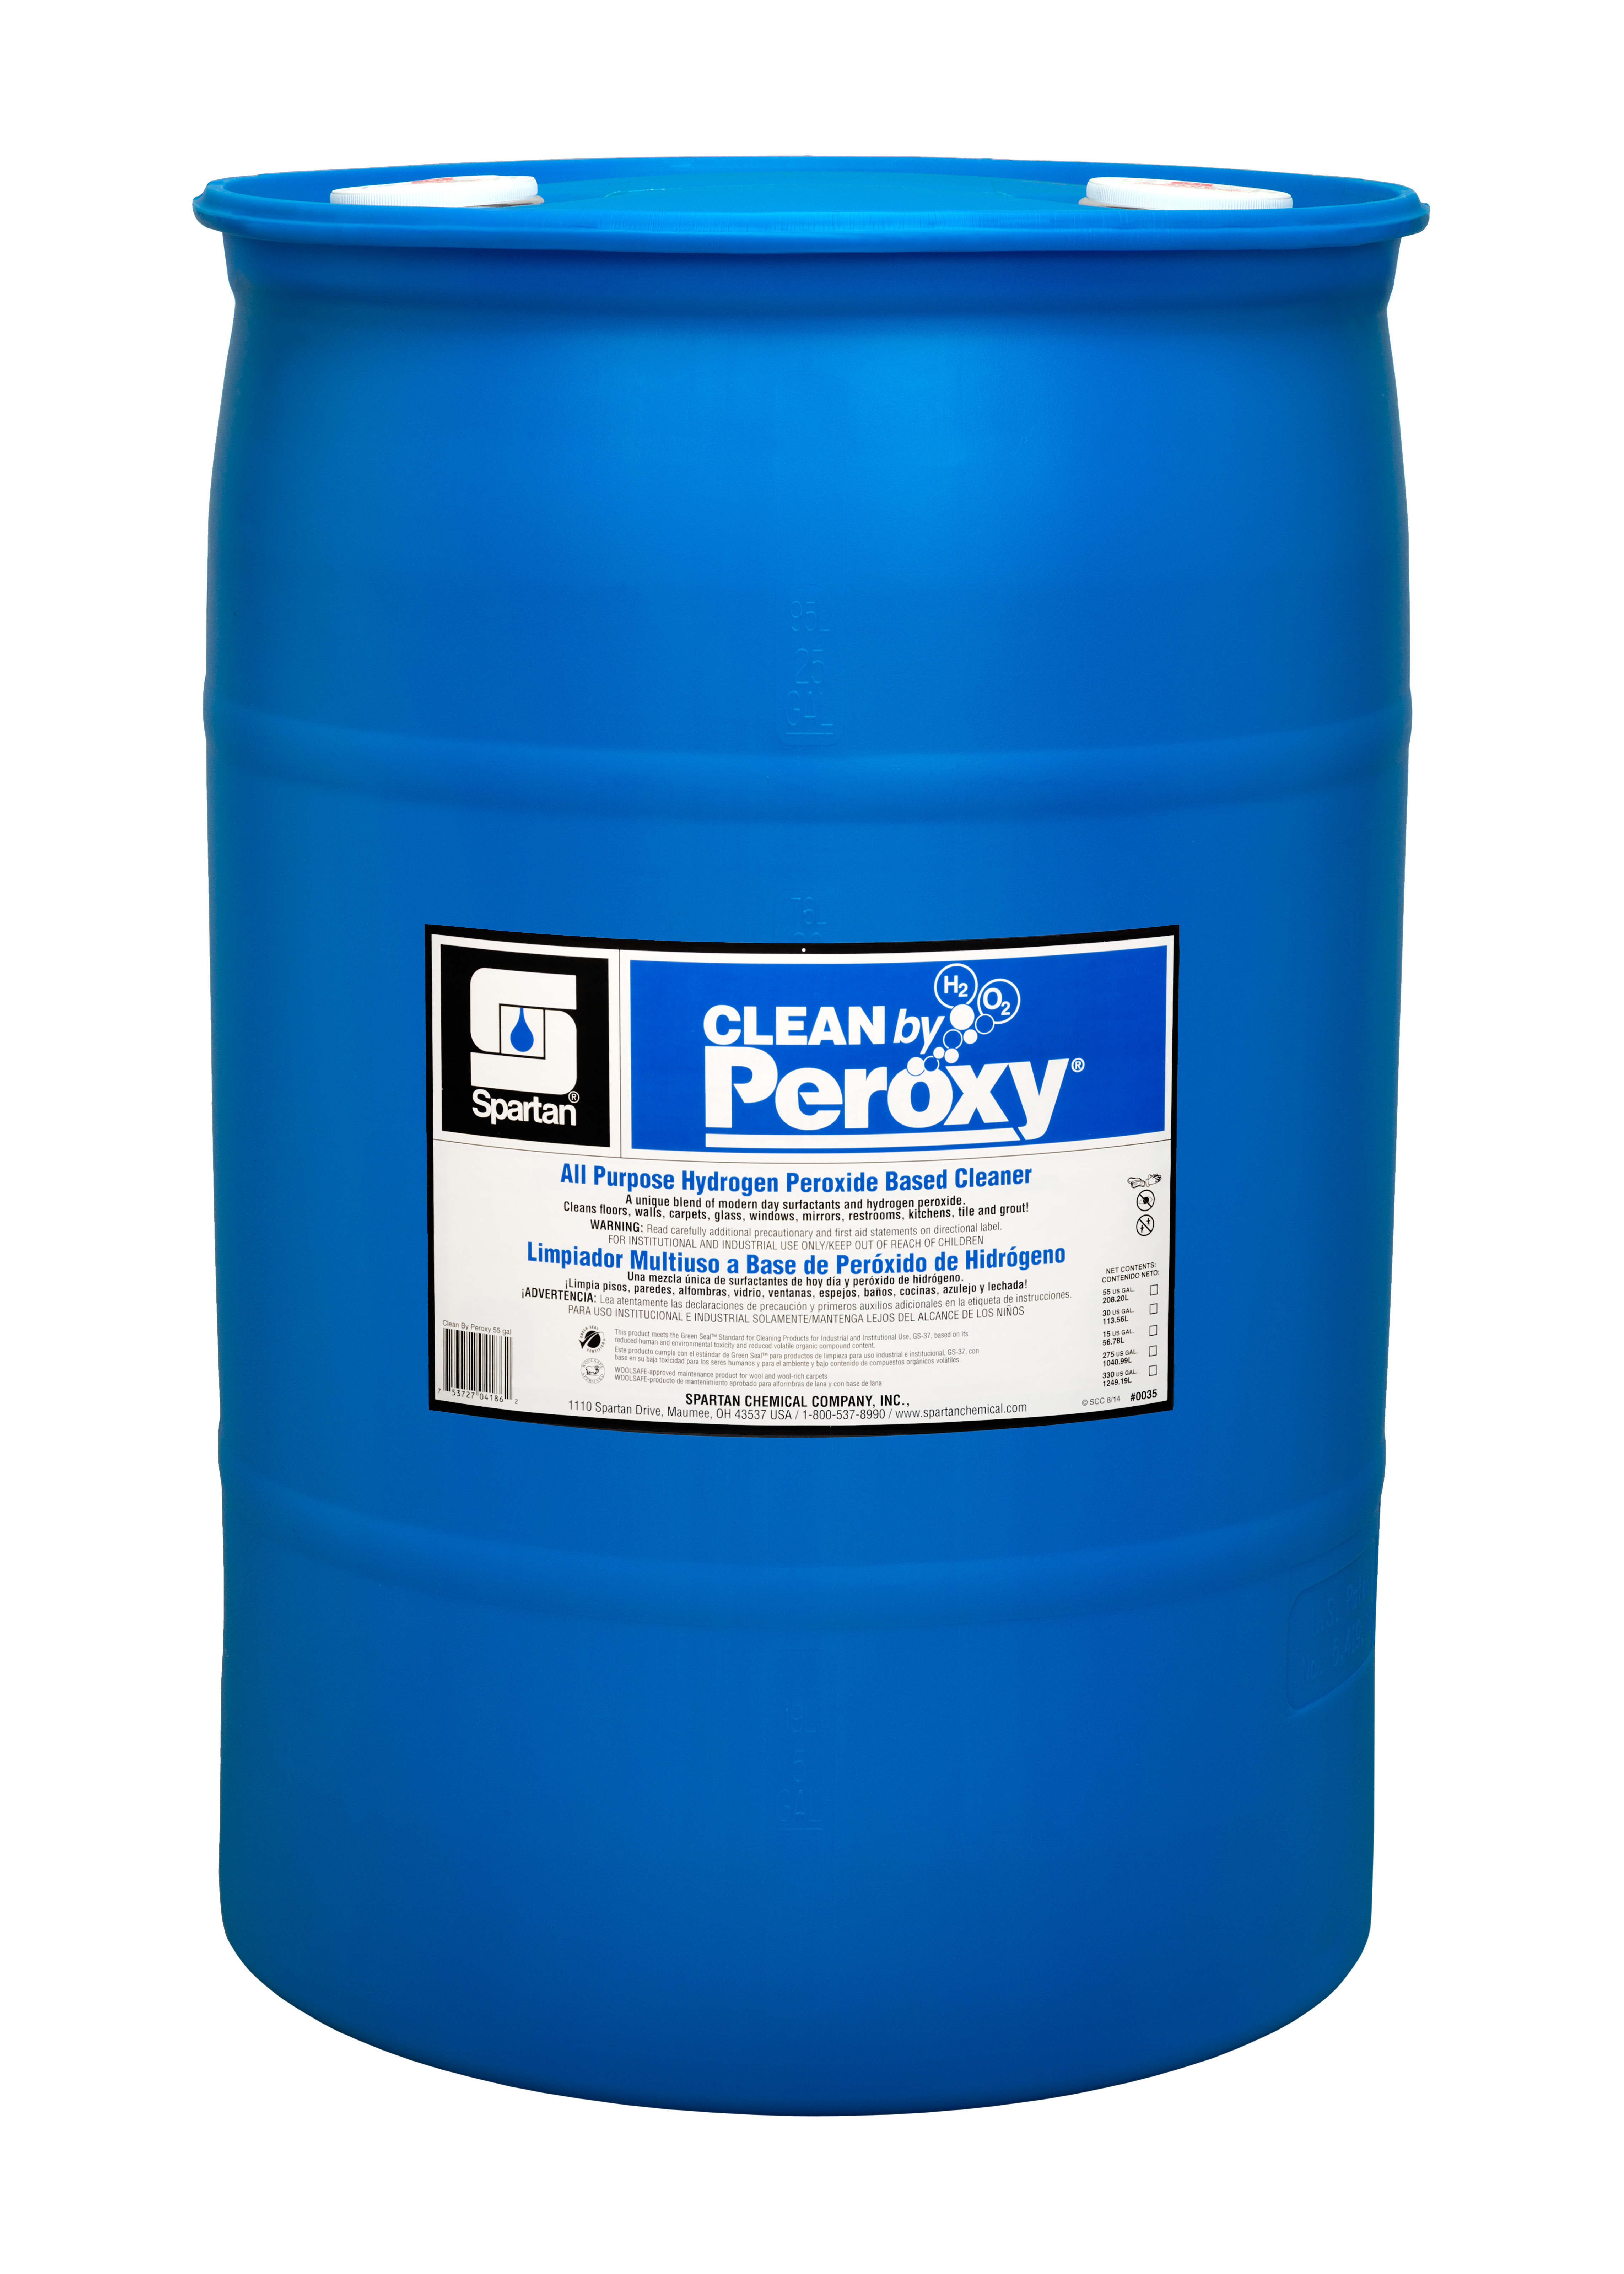 Spartan Chemical Company Clean by Peroxy, 30 GAL DRUM